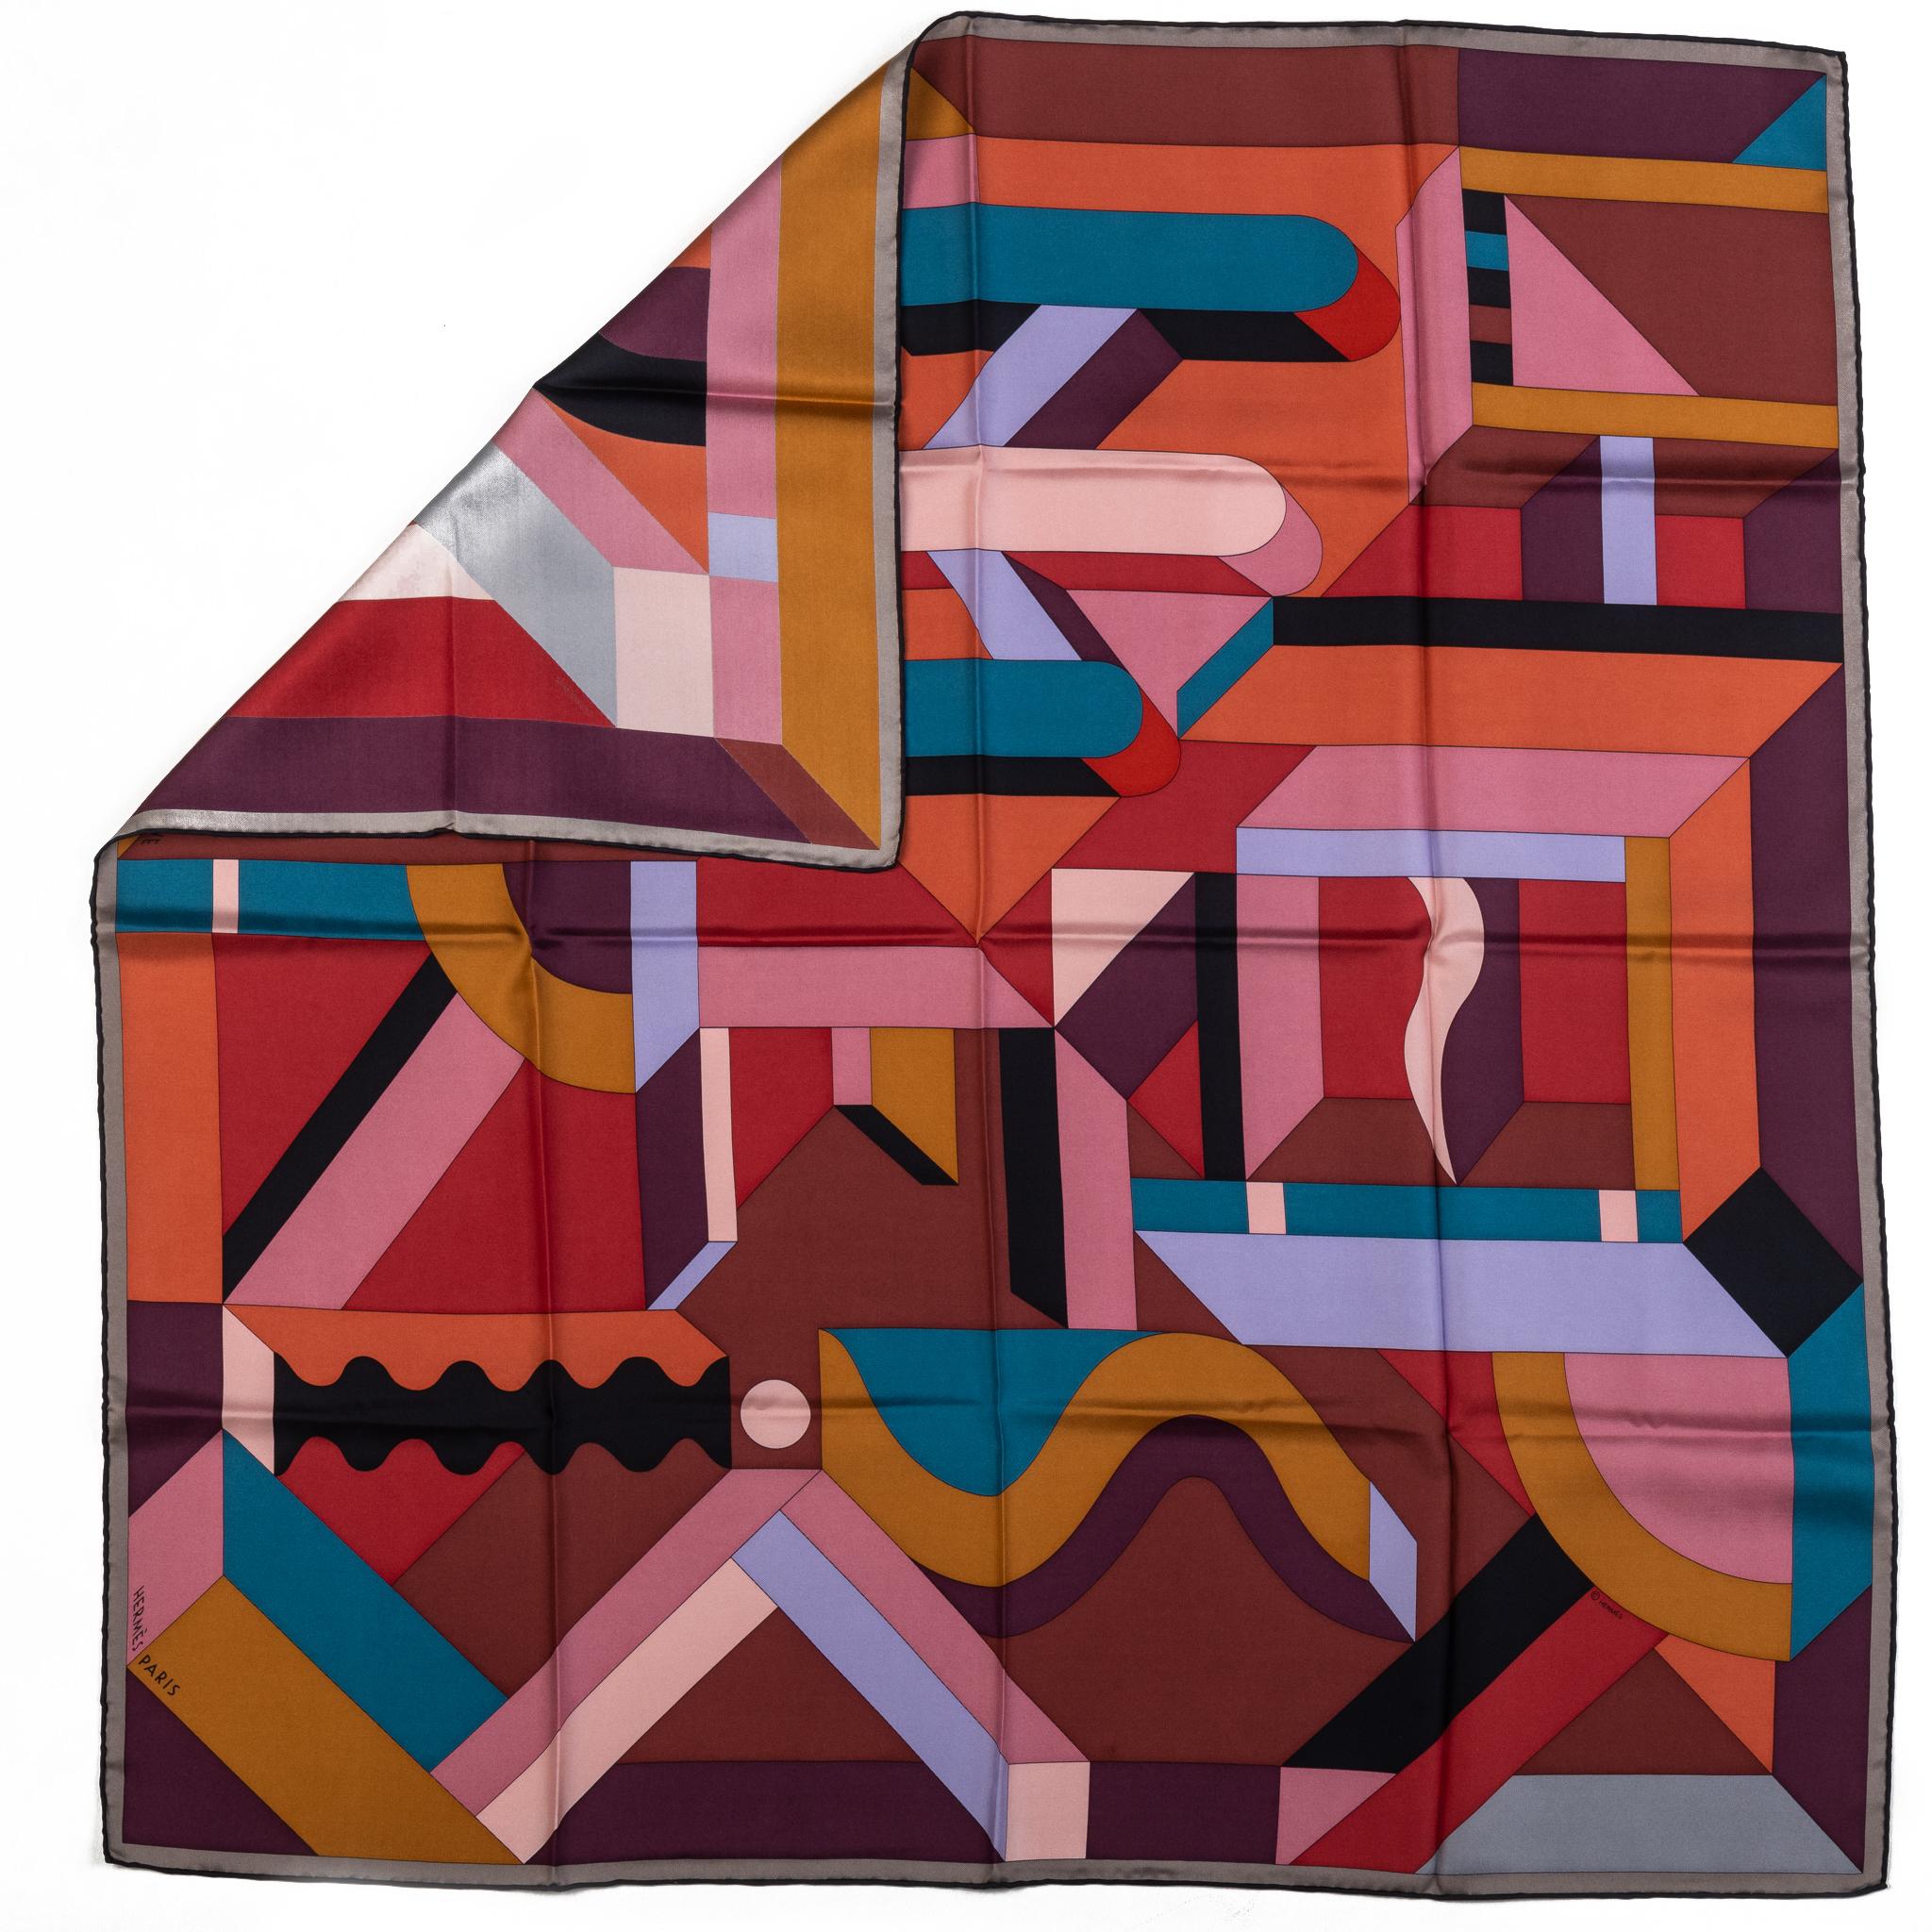 Hermes multicolor geometric silk scarf. Hand rolled edges. No box included.